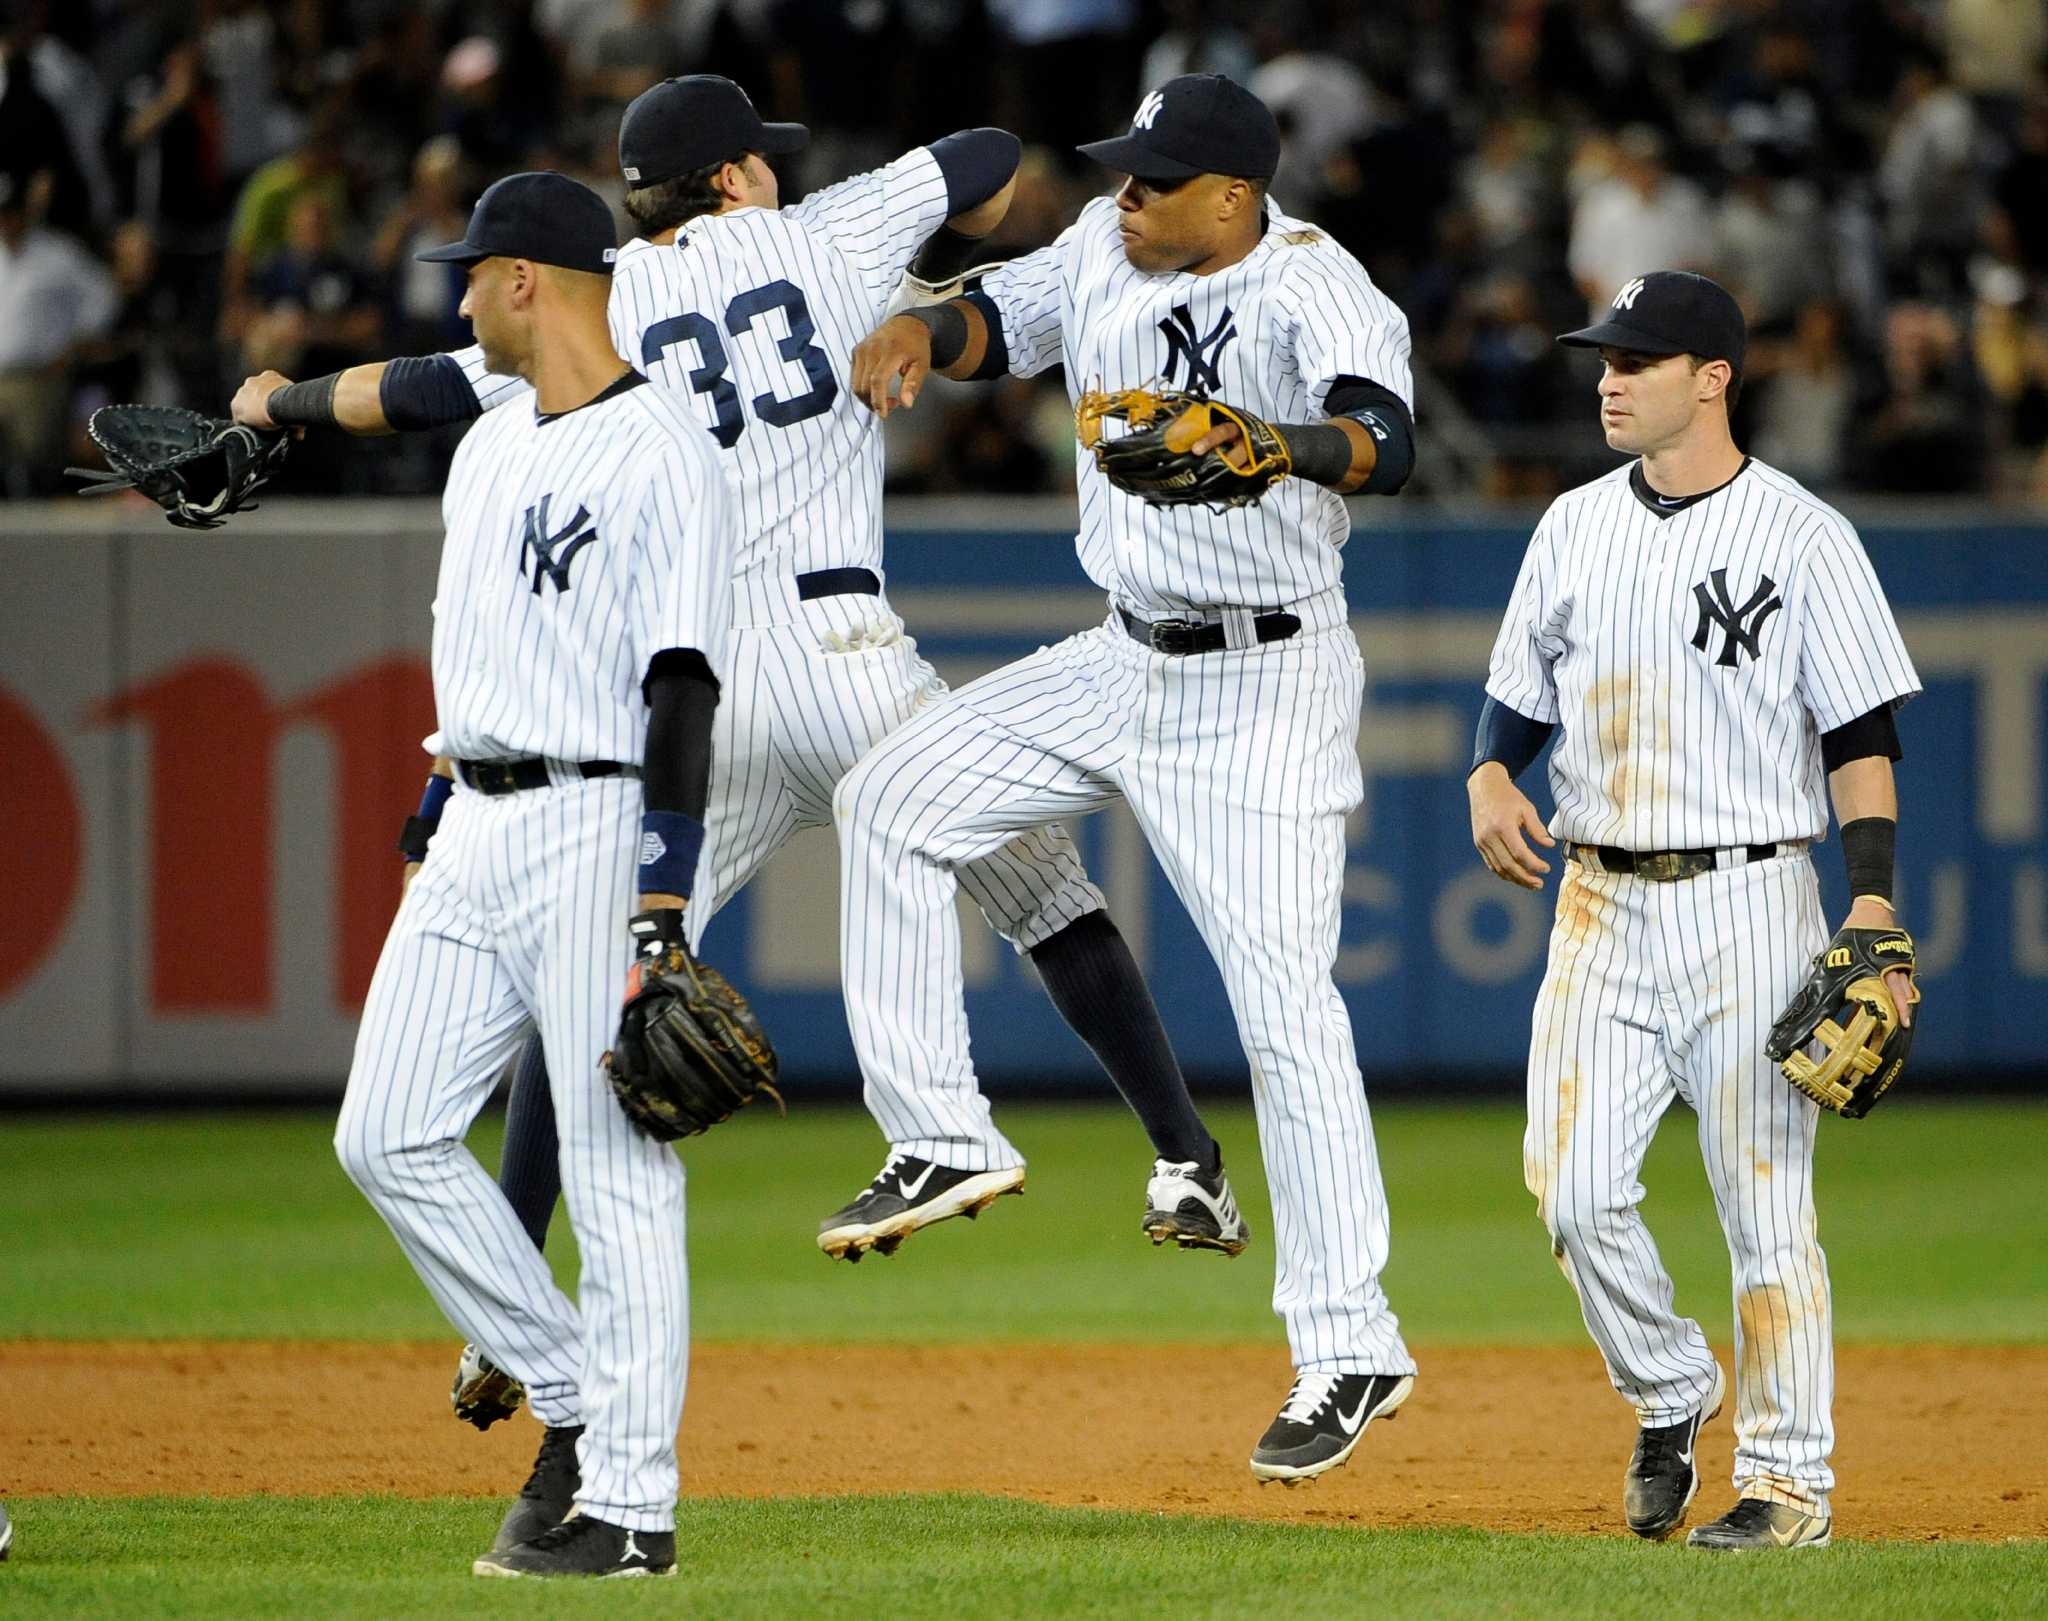 New York Yankees Outfielder Nick Swisher (#33) gets a hit. The